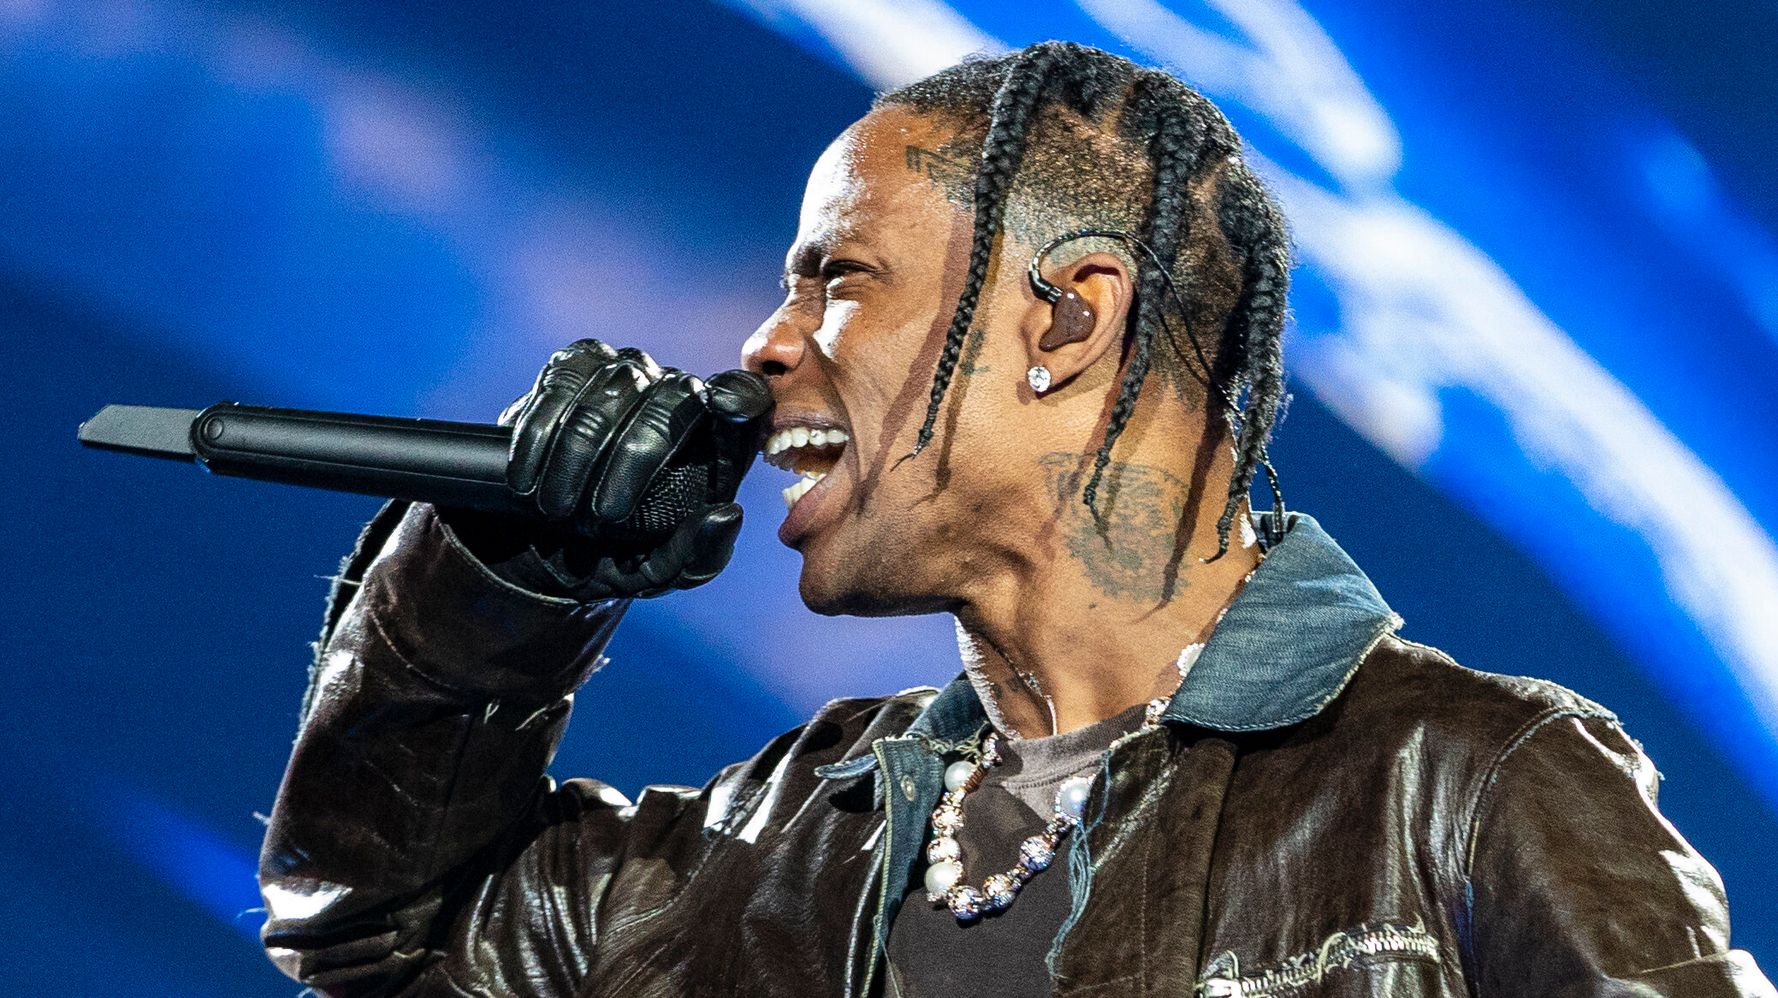 More Families Of Astroworld Victims Decline Travis Scott's Funeral Costs Offer | HuffPost Latest News